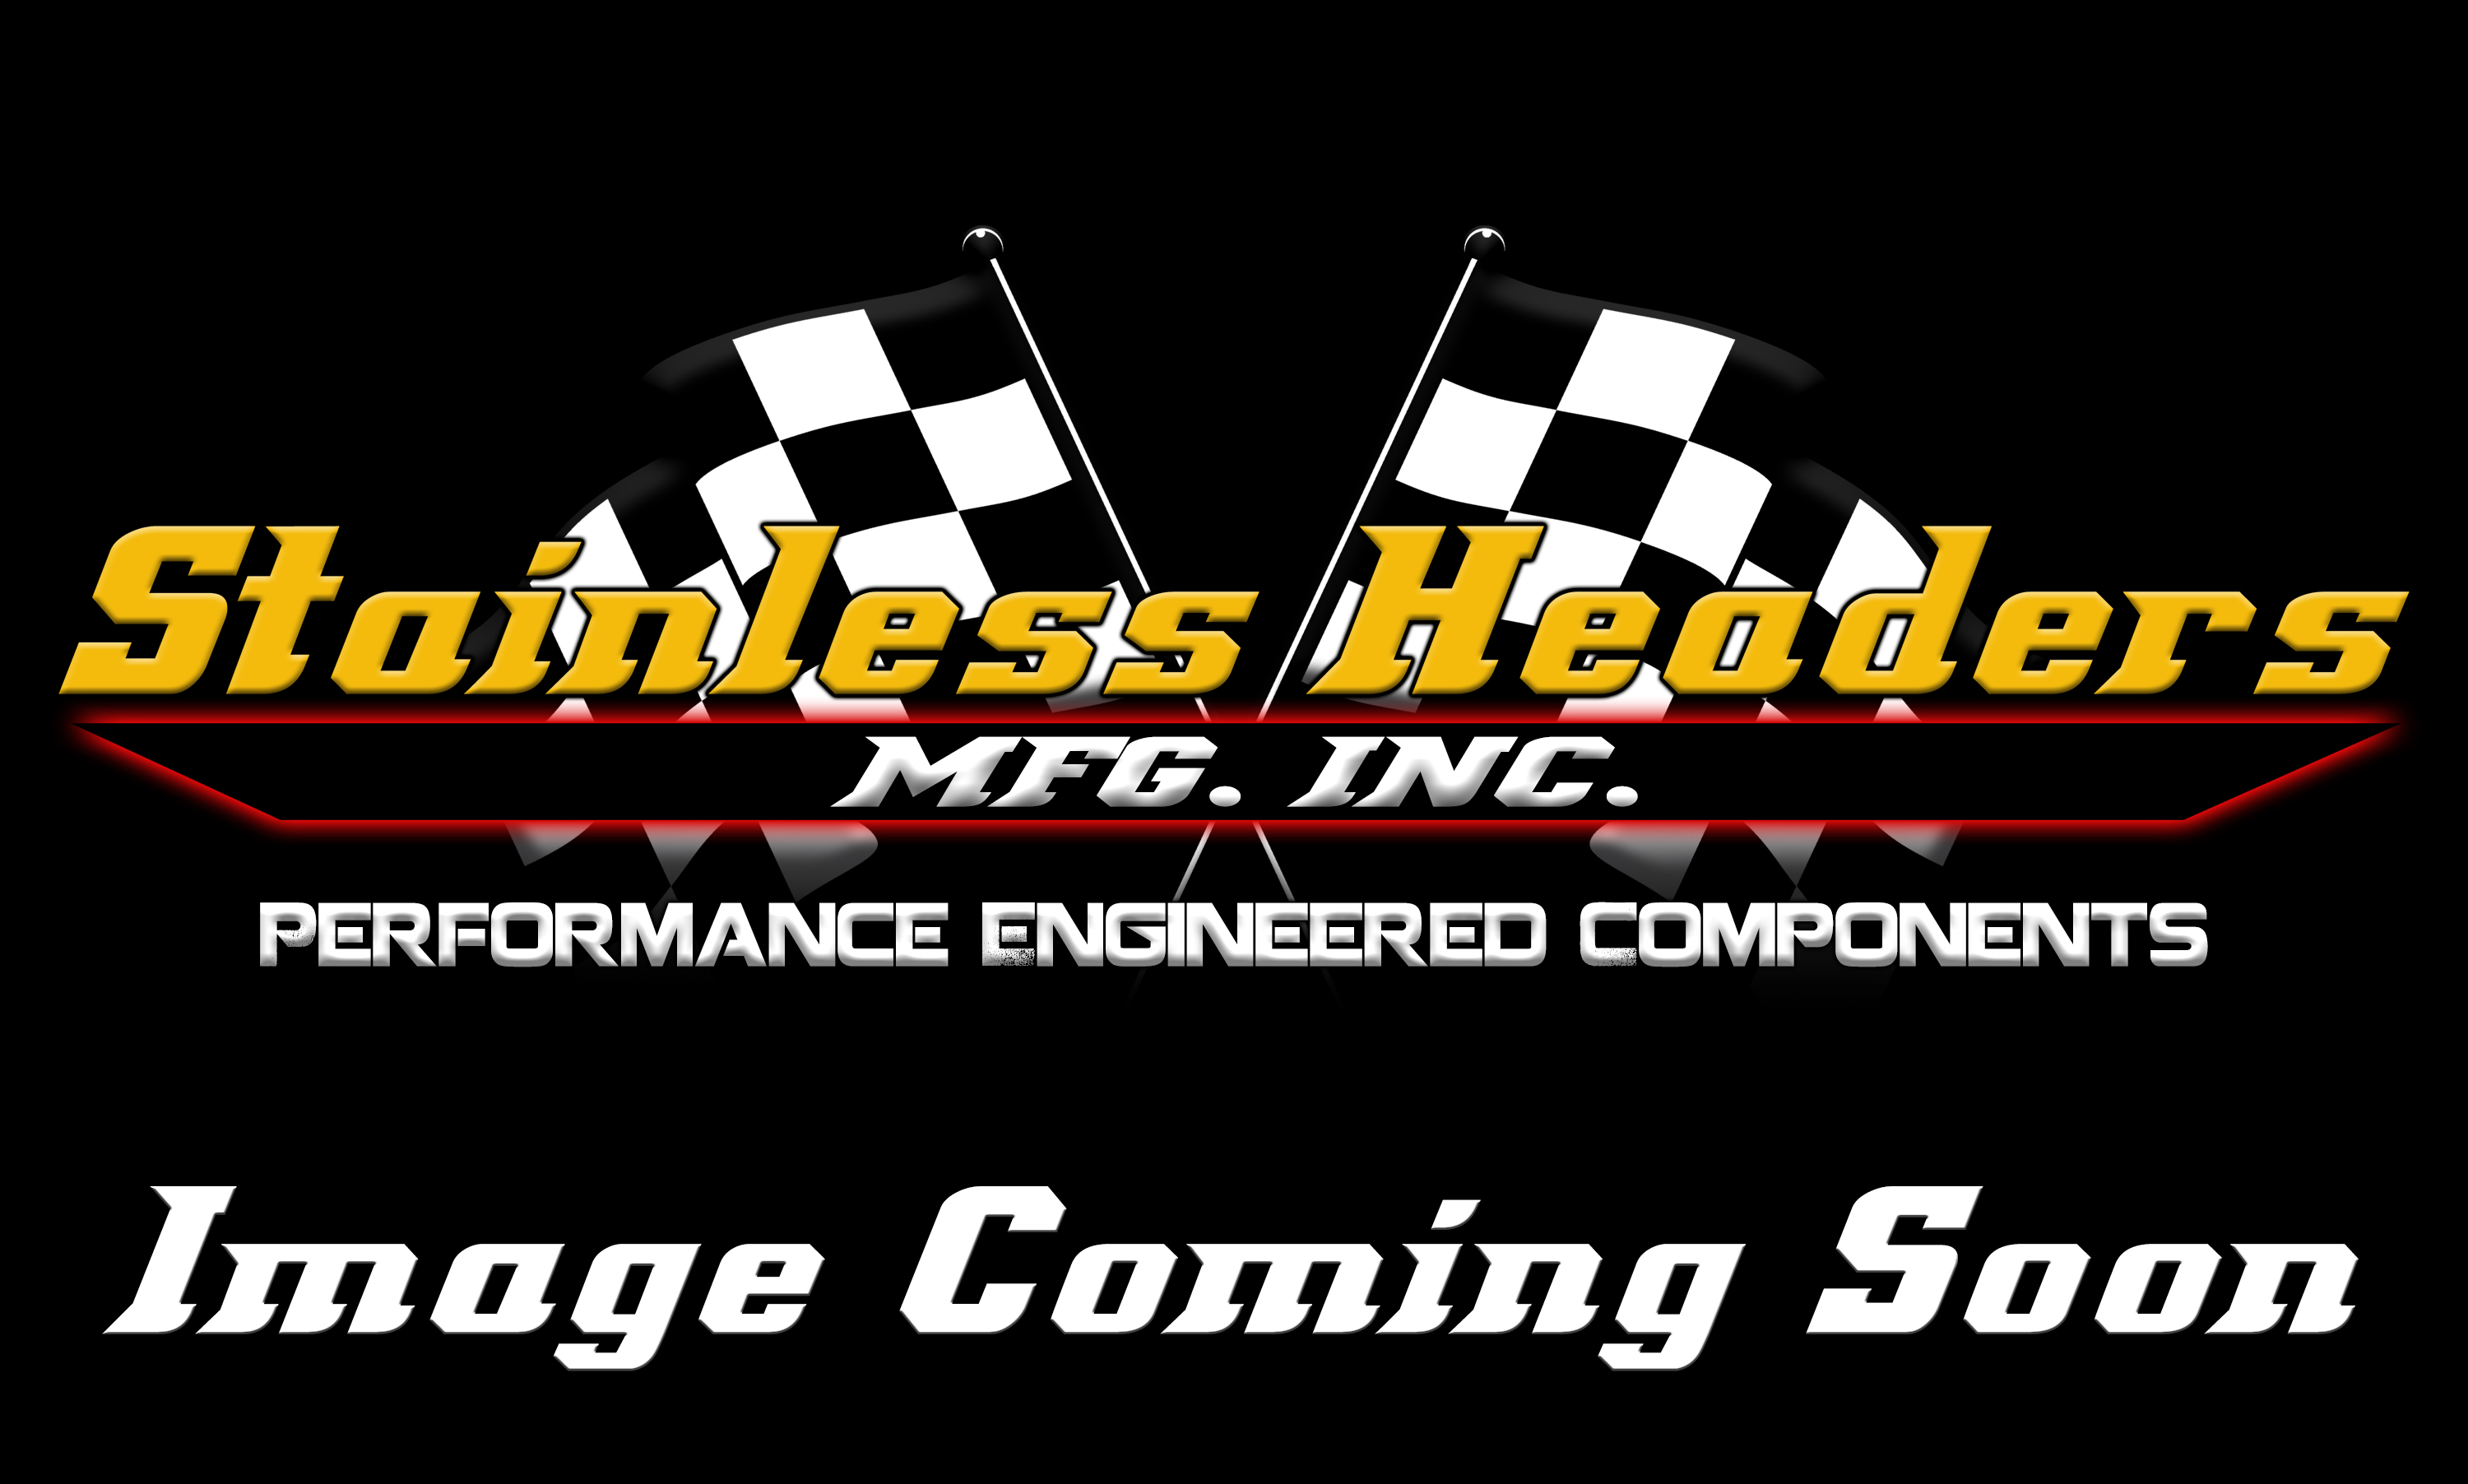 Stainless Headers - 2 1/4" Primary 4 into 1 Performance Merge Collector-16ga 321ss - Image 3